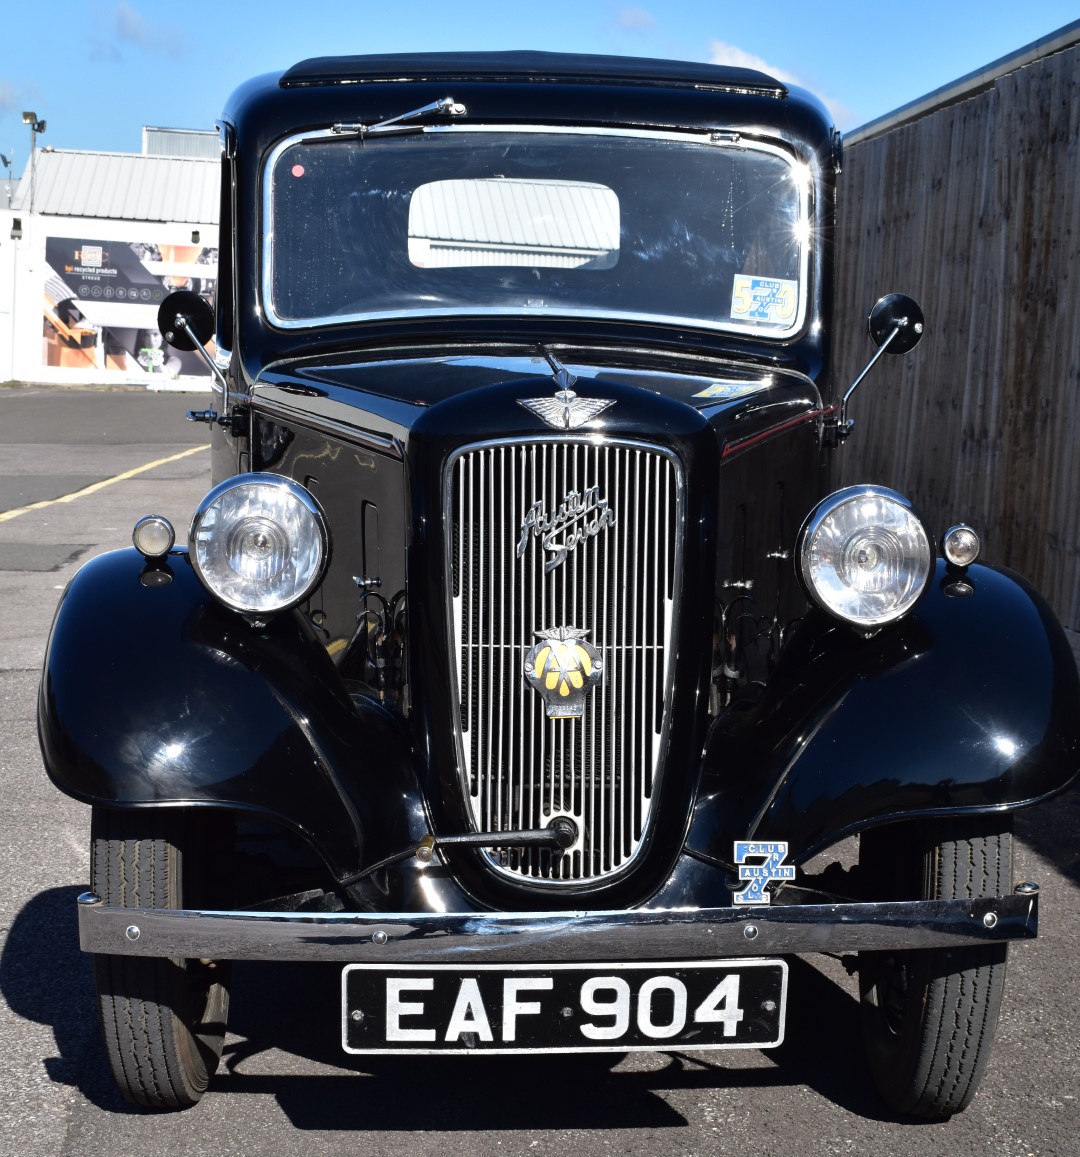 1938 Austin Seven Ruby, registration number EAF 904, with continuation 1964 buff logbook and V5c, - Image 15 of 24